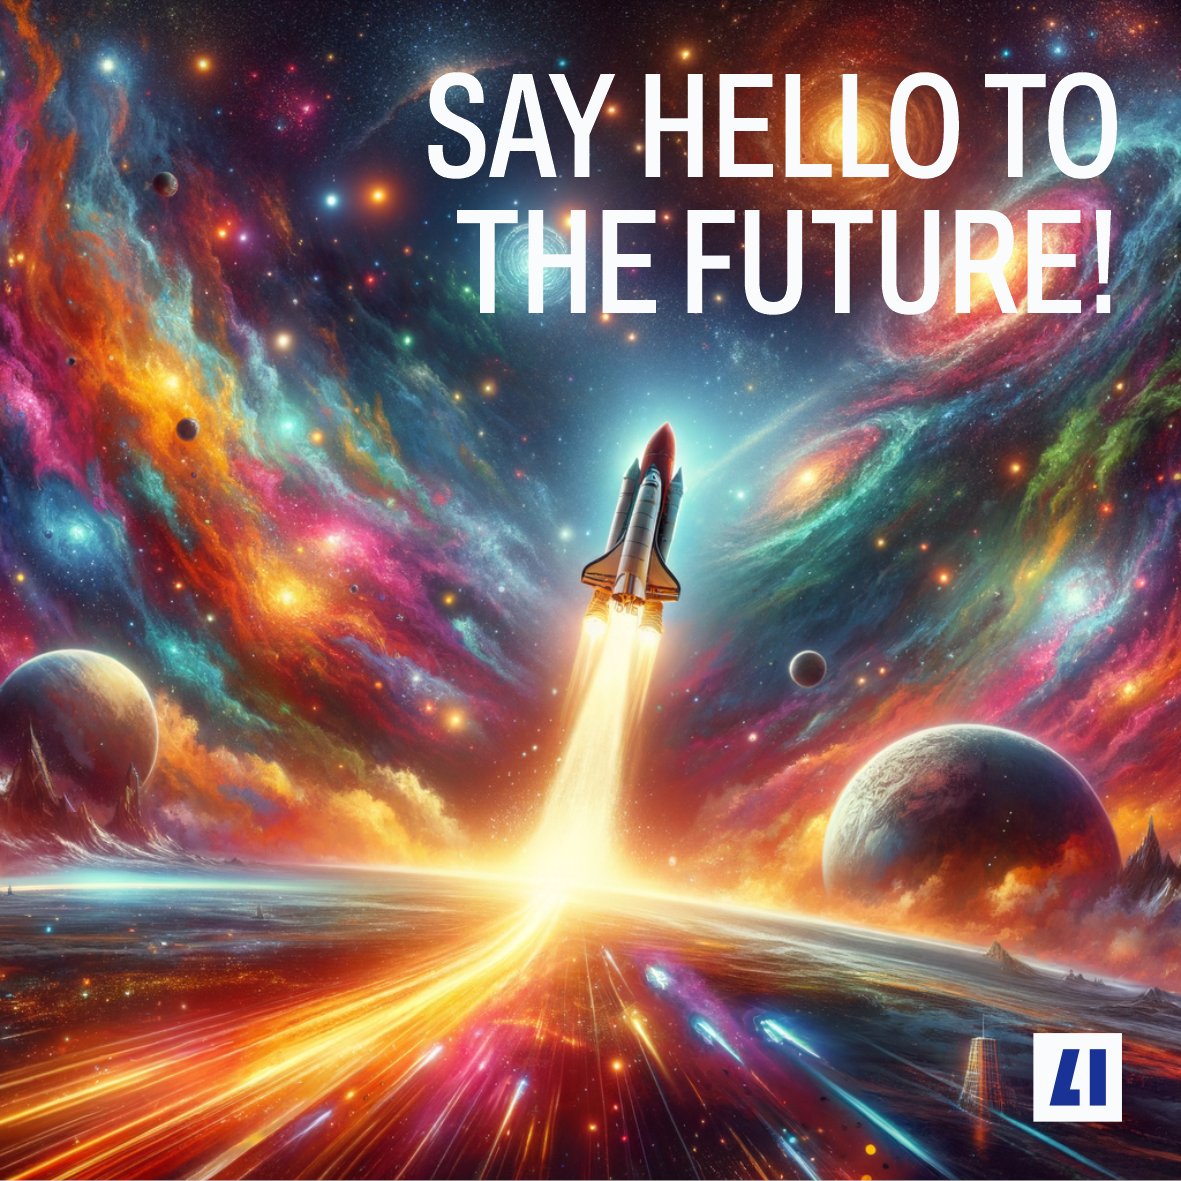 Hello future enthusiasts! Imagine a world where Artificial Intelligence transforms the ordinary into the extraordinary. From personalized experiences to groundbreaking innovations, the future with AI is limitless. #FutureWithAI #InnovationJourney #AIEnthusiast